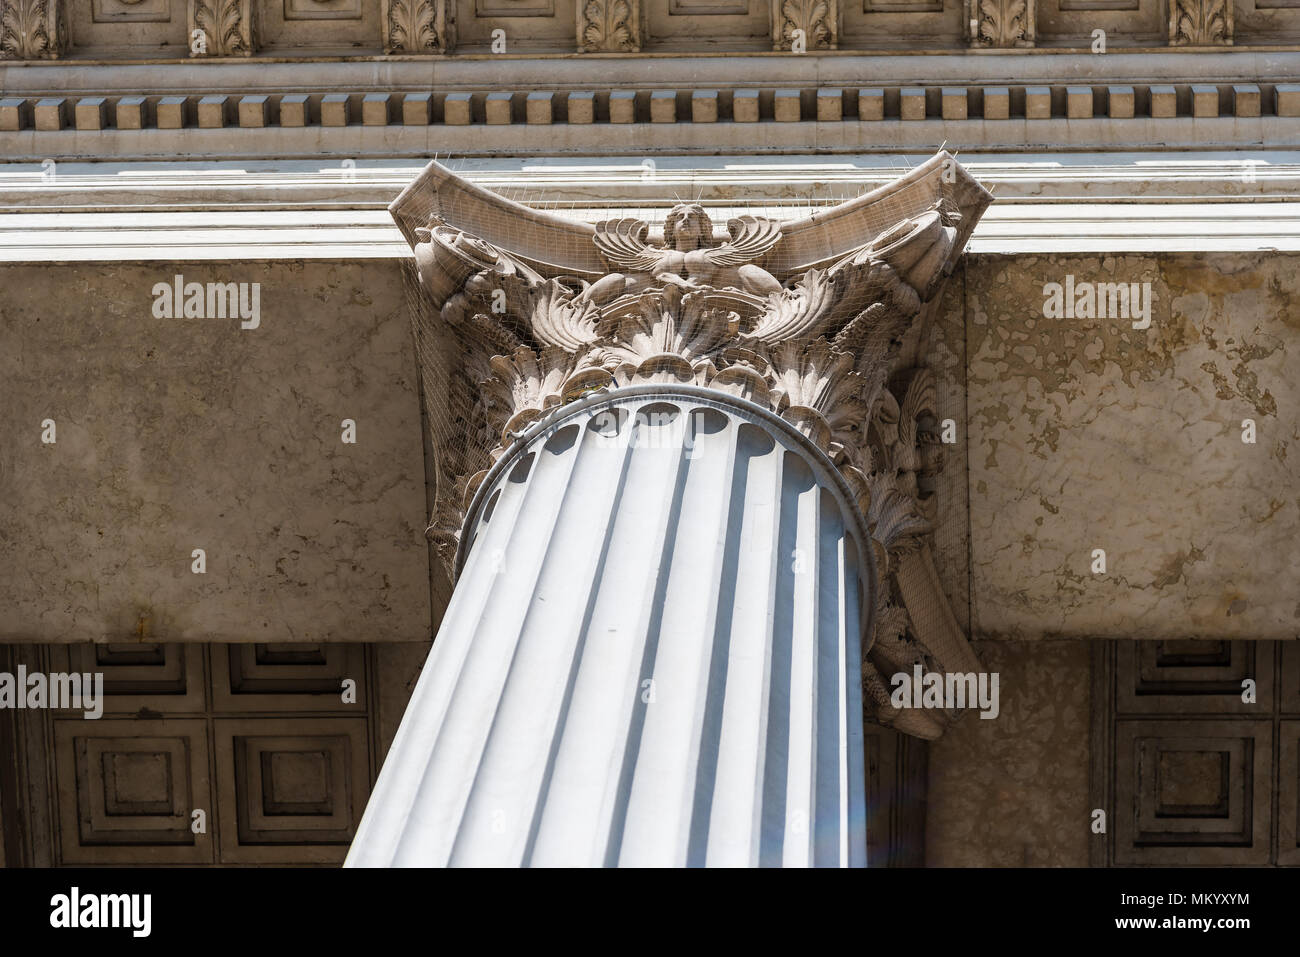 Low angle view of corinthian capital of classical style architectural column Stock Photo